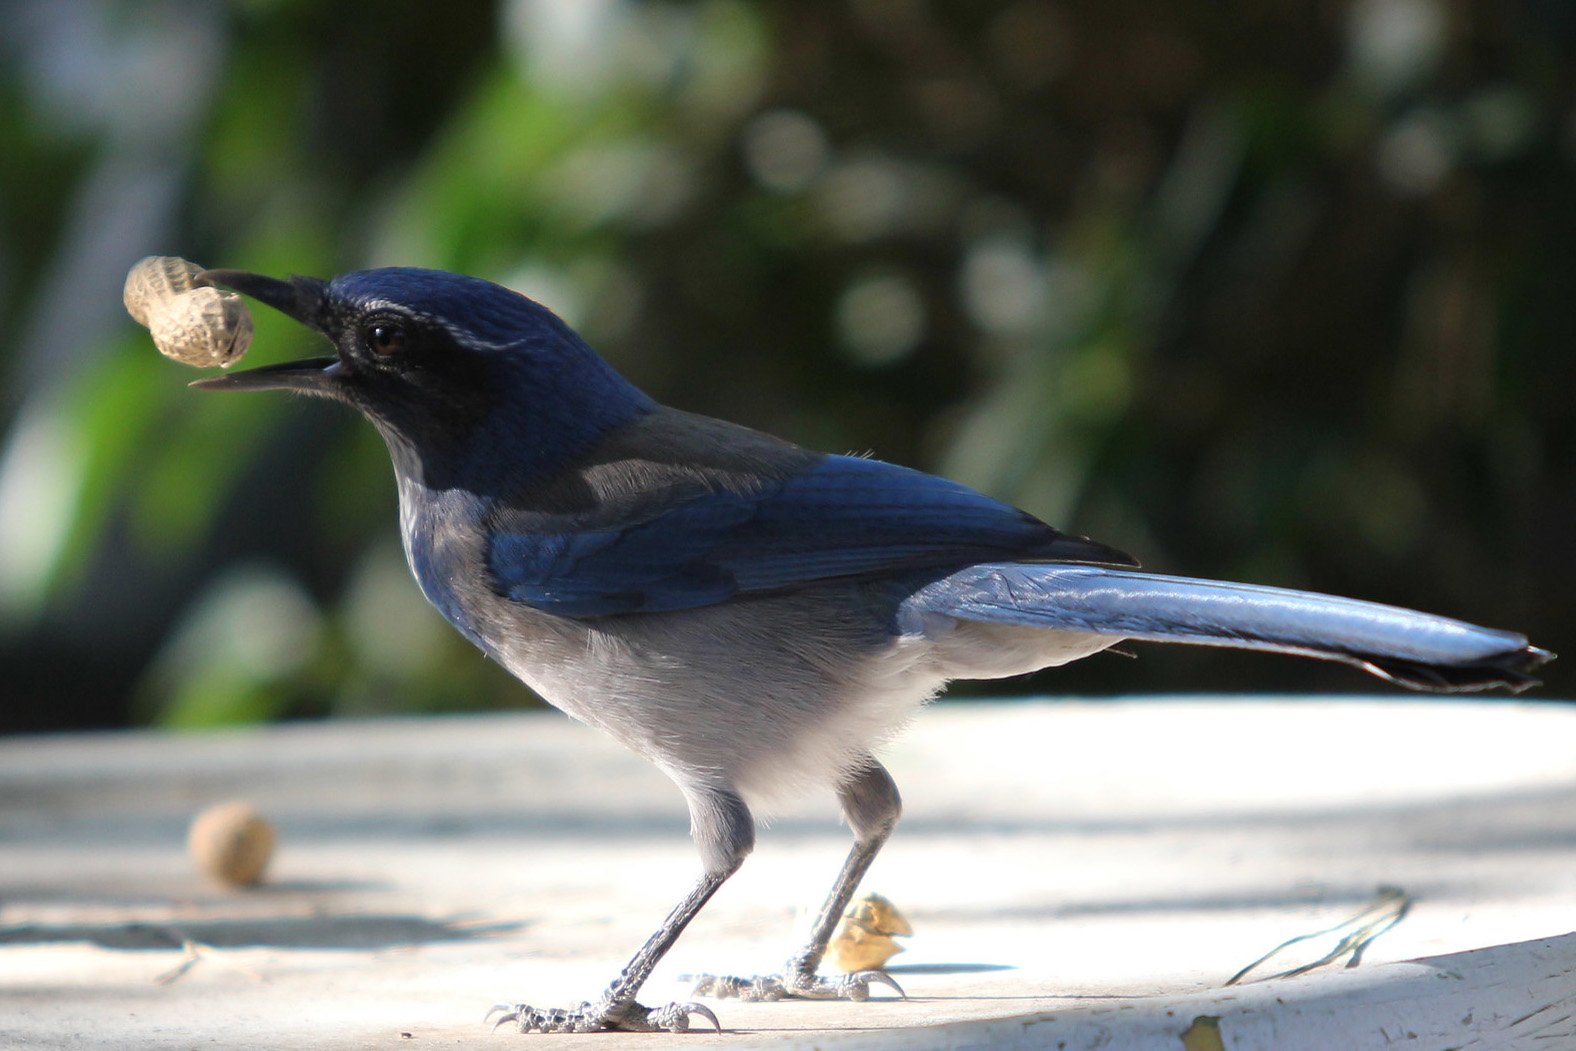 A Western Scrub Jay Gathering peanuts to demonstrate a jay that caches.